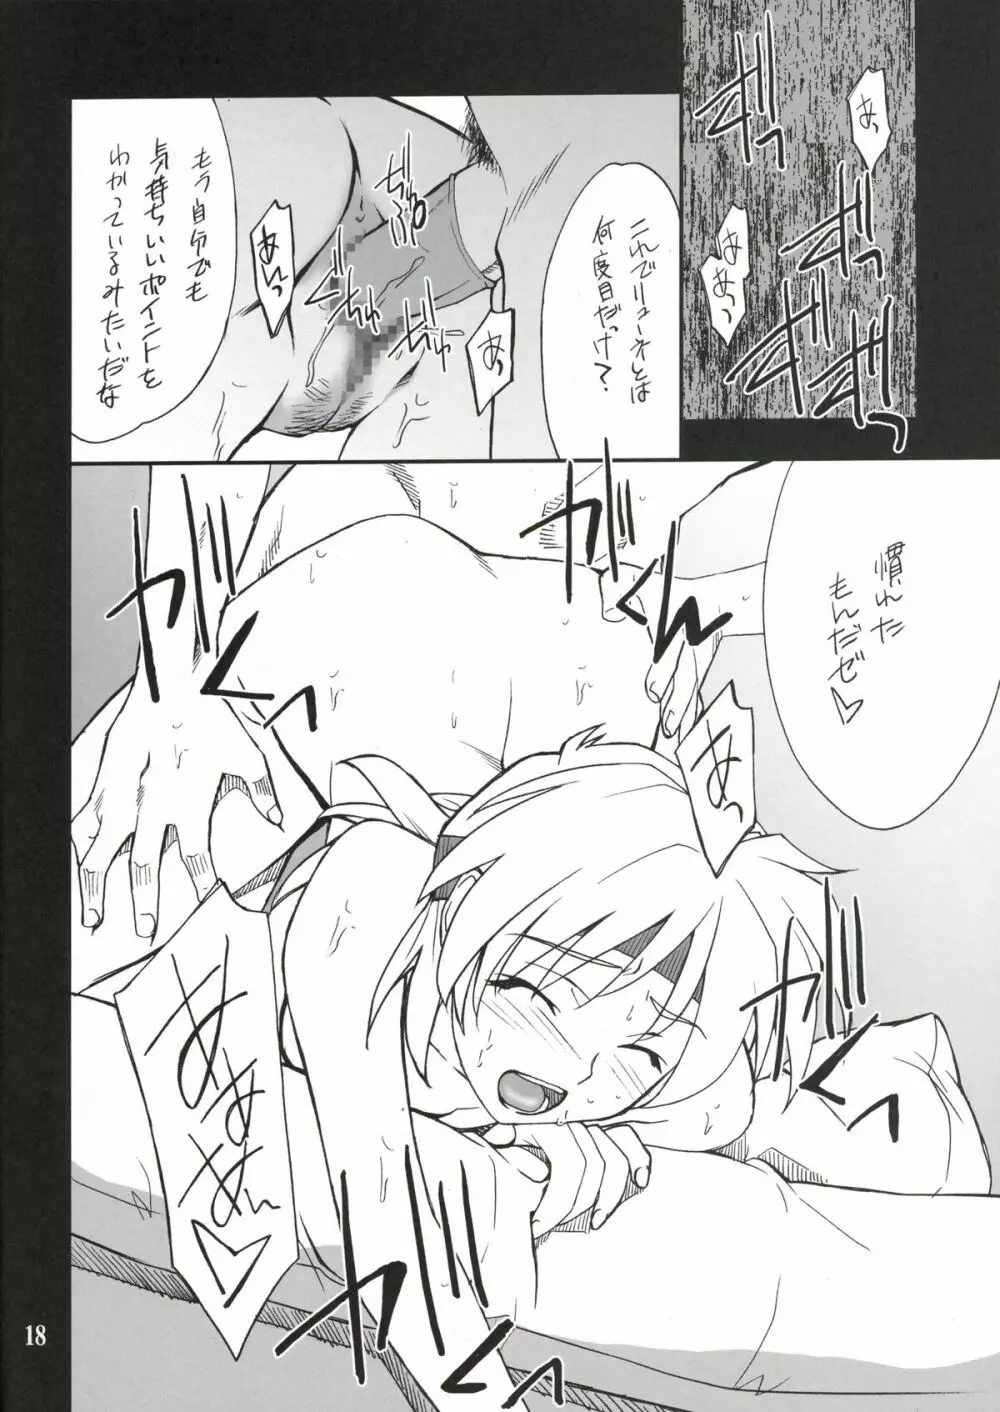 INTERMISSION_if code_07:RYUNE Page.17